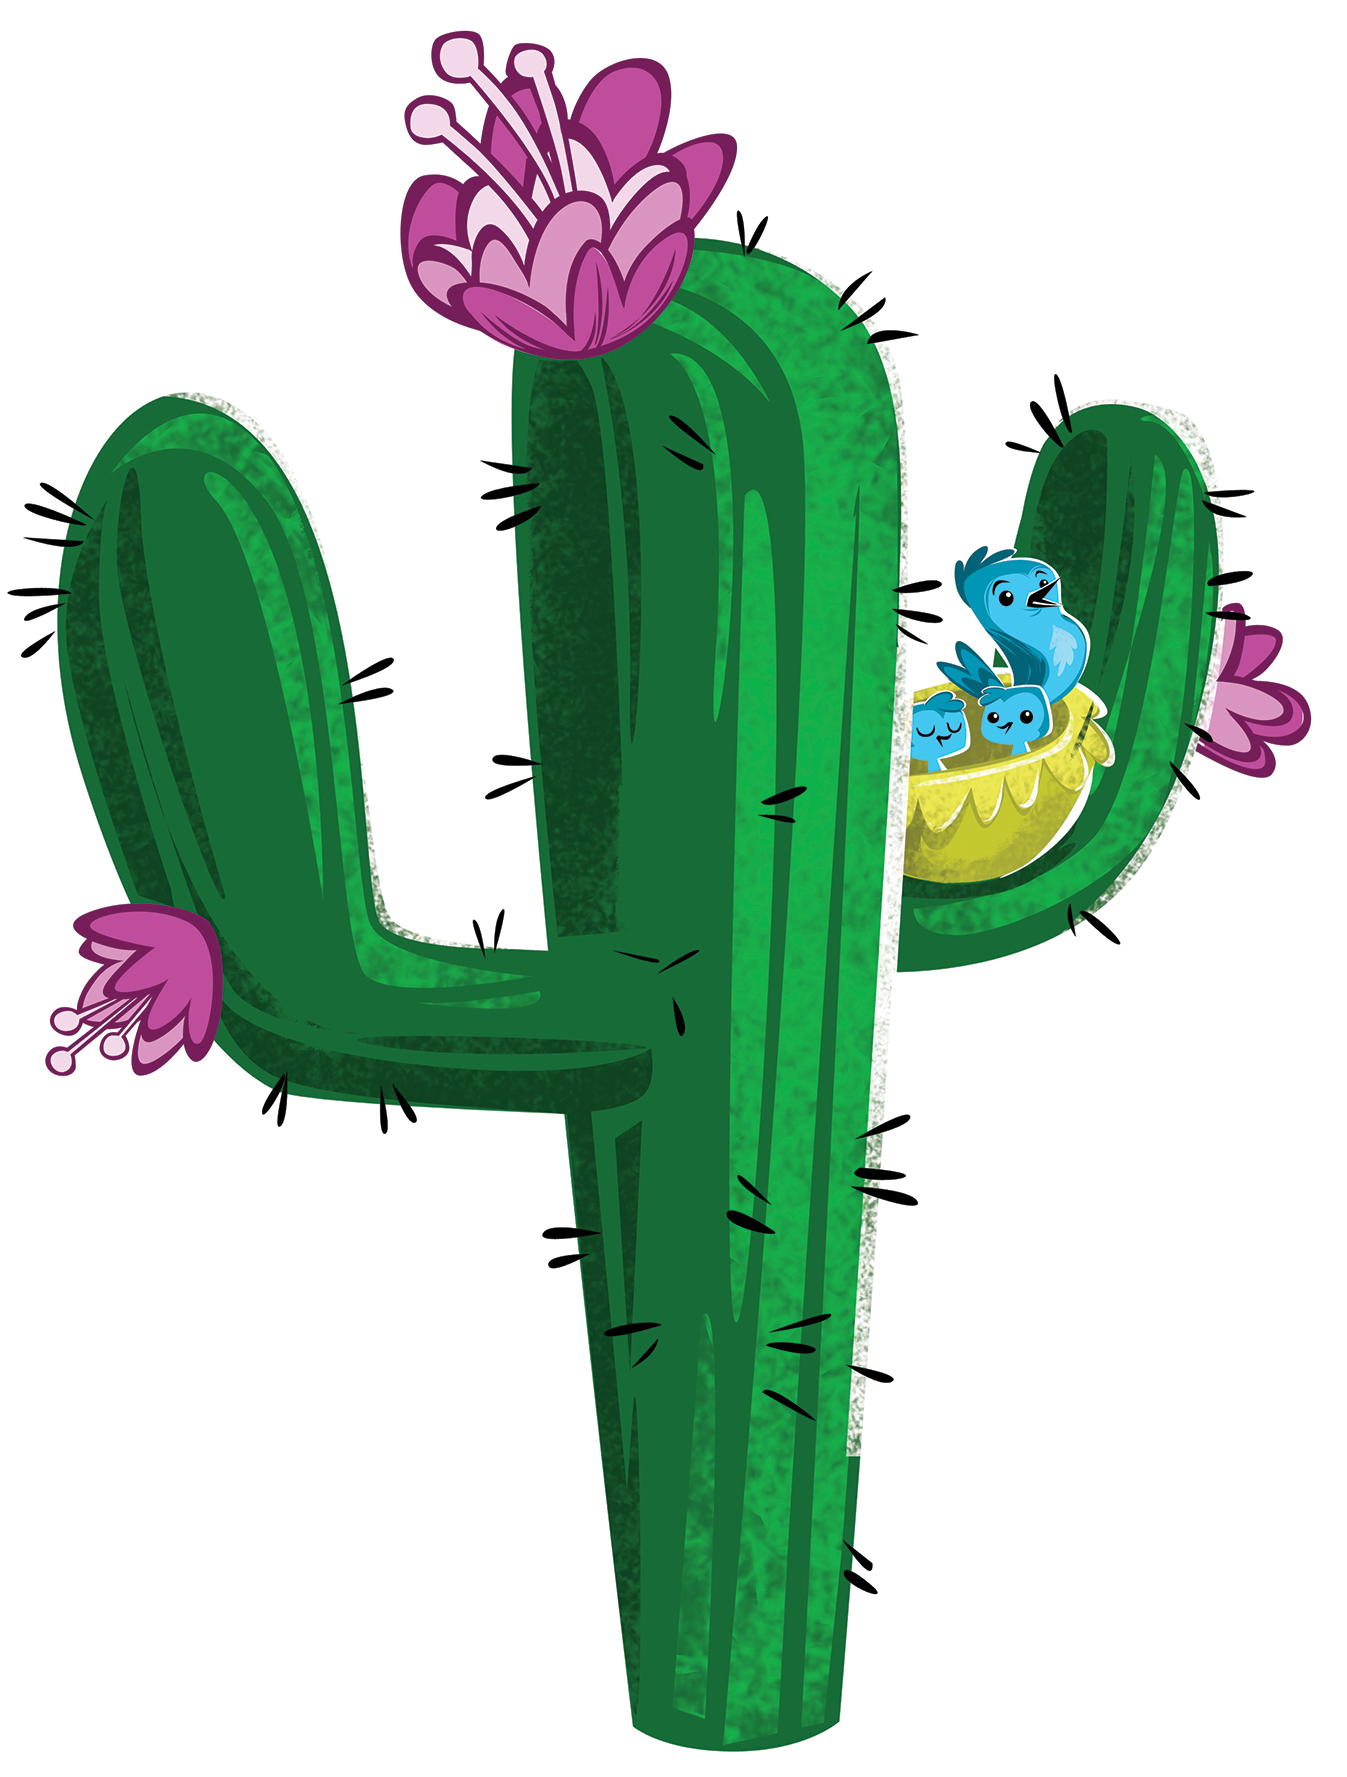 Free Cartoon Cactus Pictures, Download Free Cartoon Cactus Pictures png images, Free ClipArts on